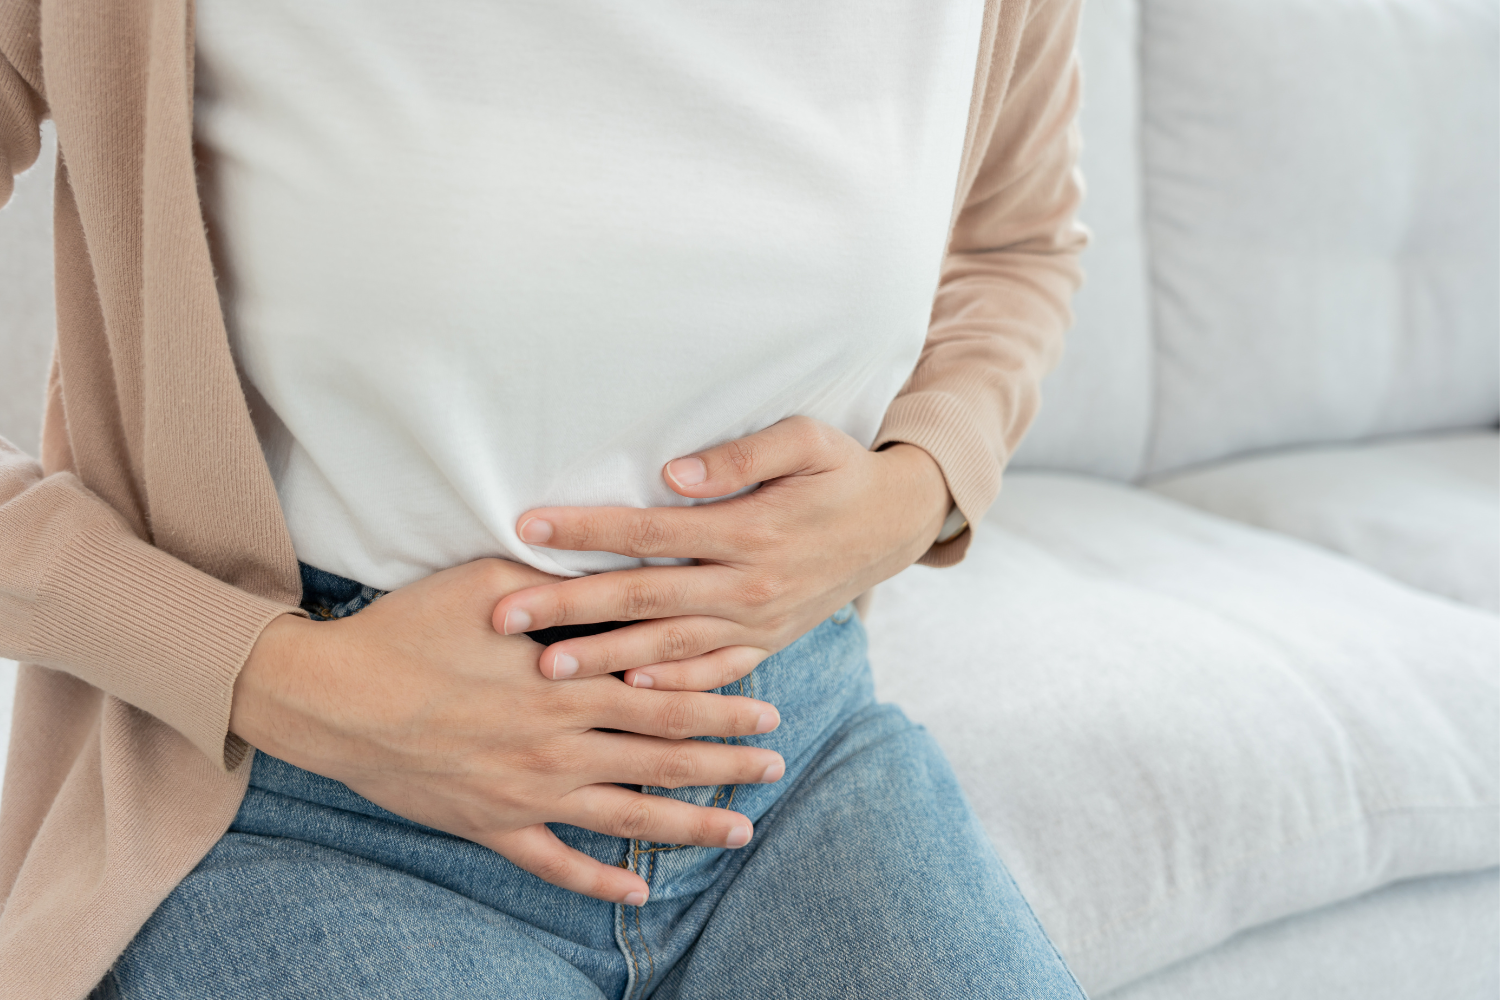 What You Should Eat to Easily Stop Constipation